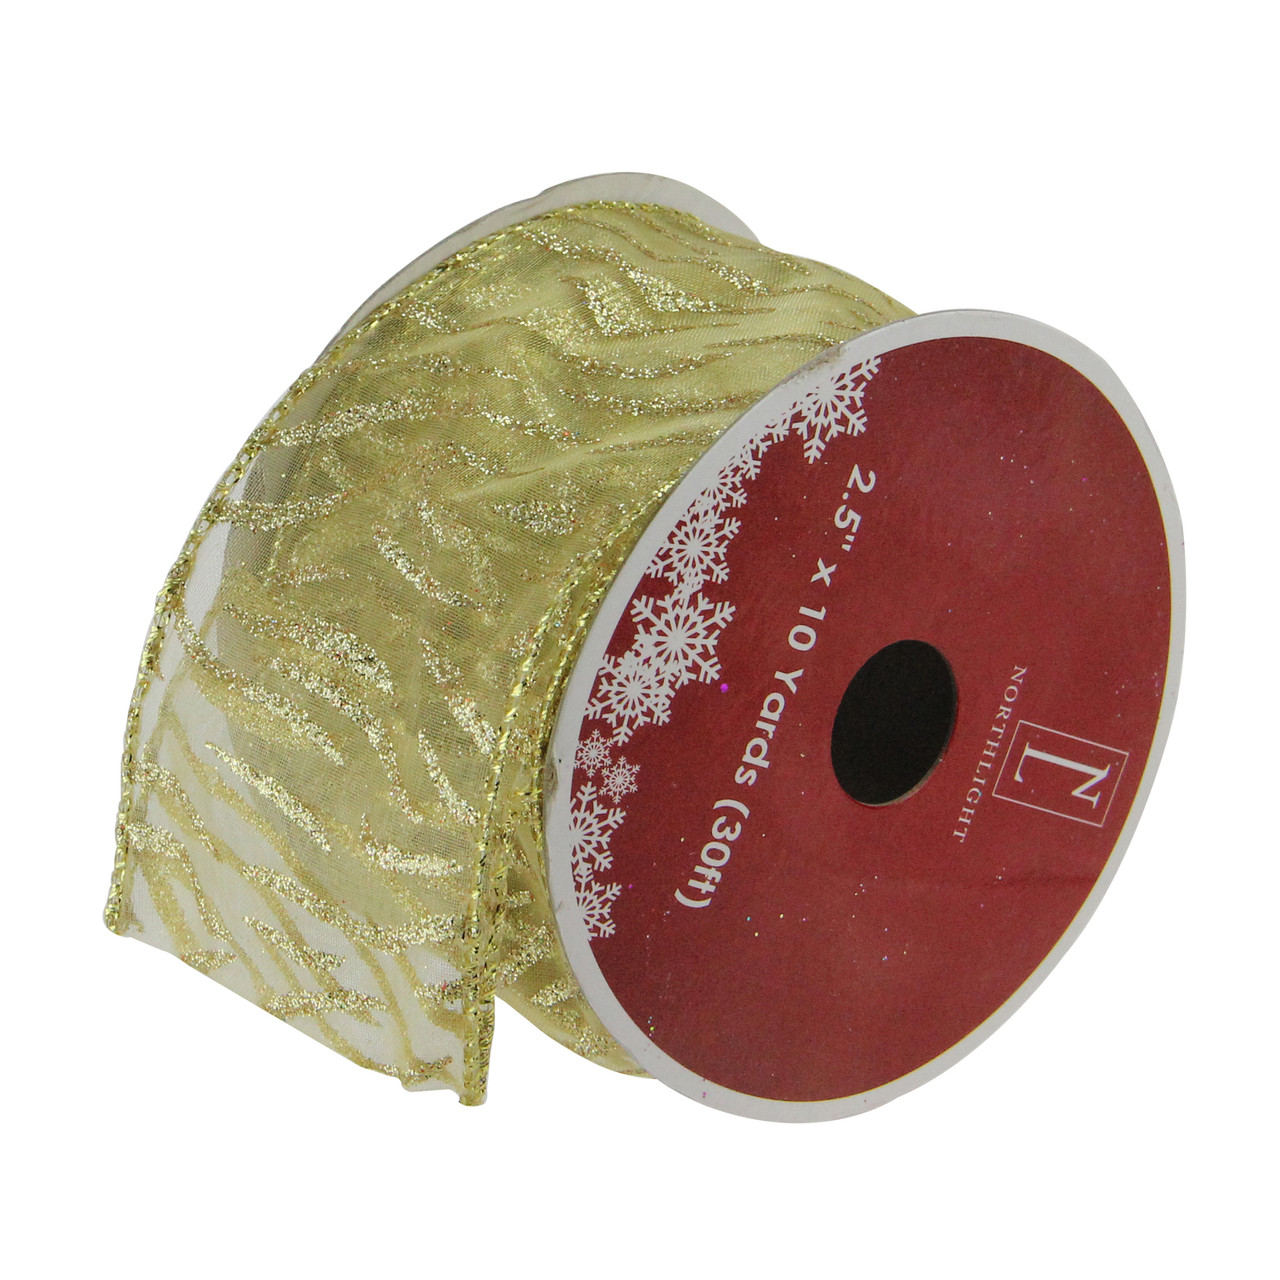 Northlight 2.5 x 120 Yards Star Christmas Wired Craft Ribbons, 12 pk. -  Red and Beige